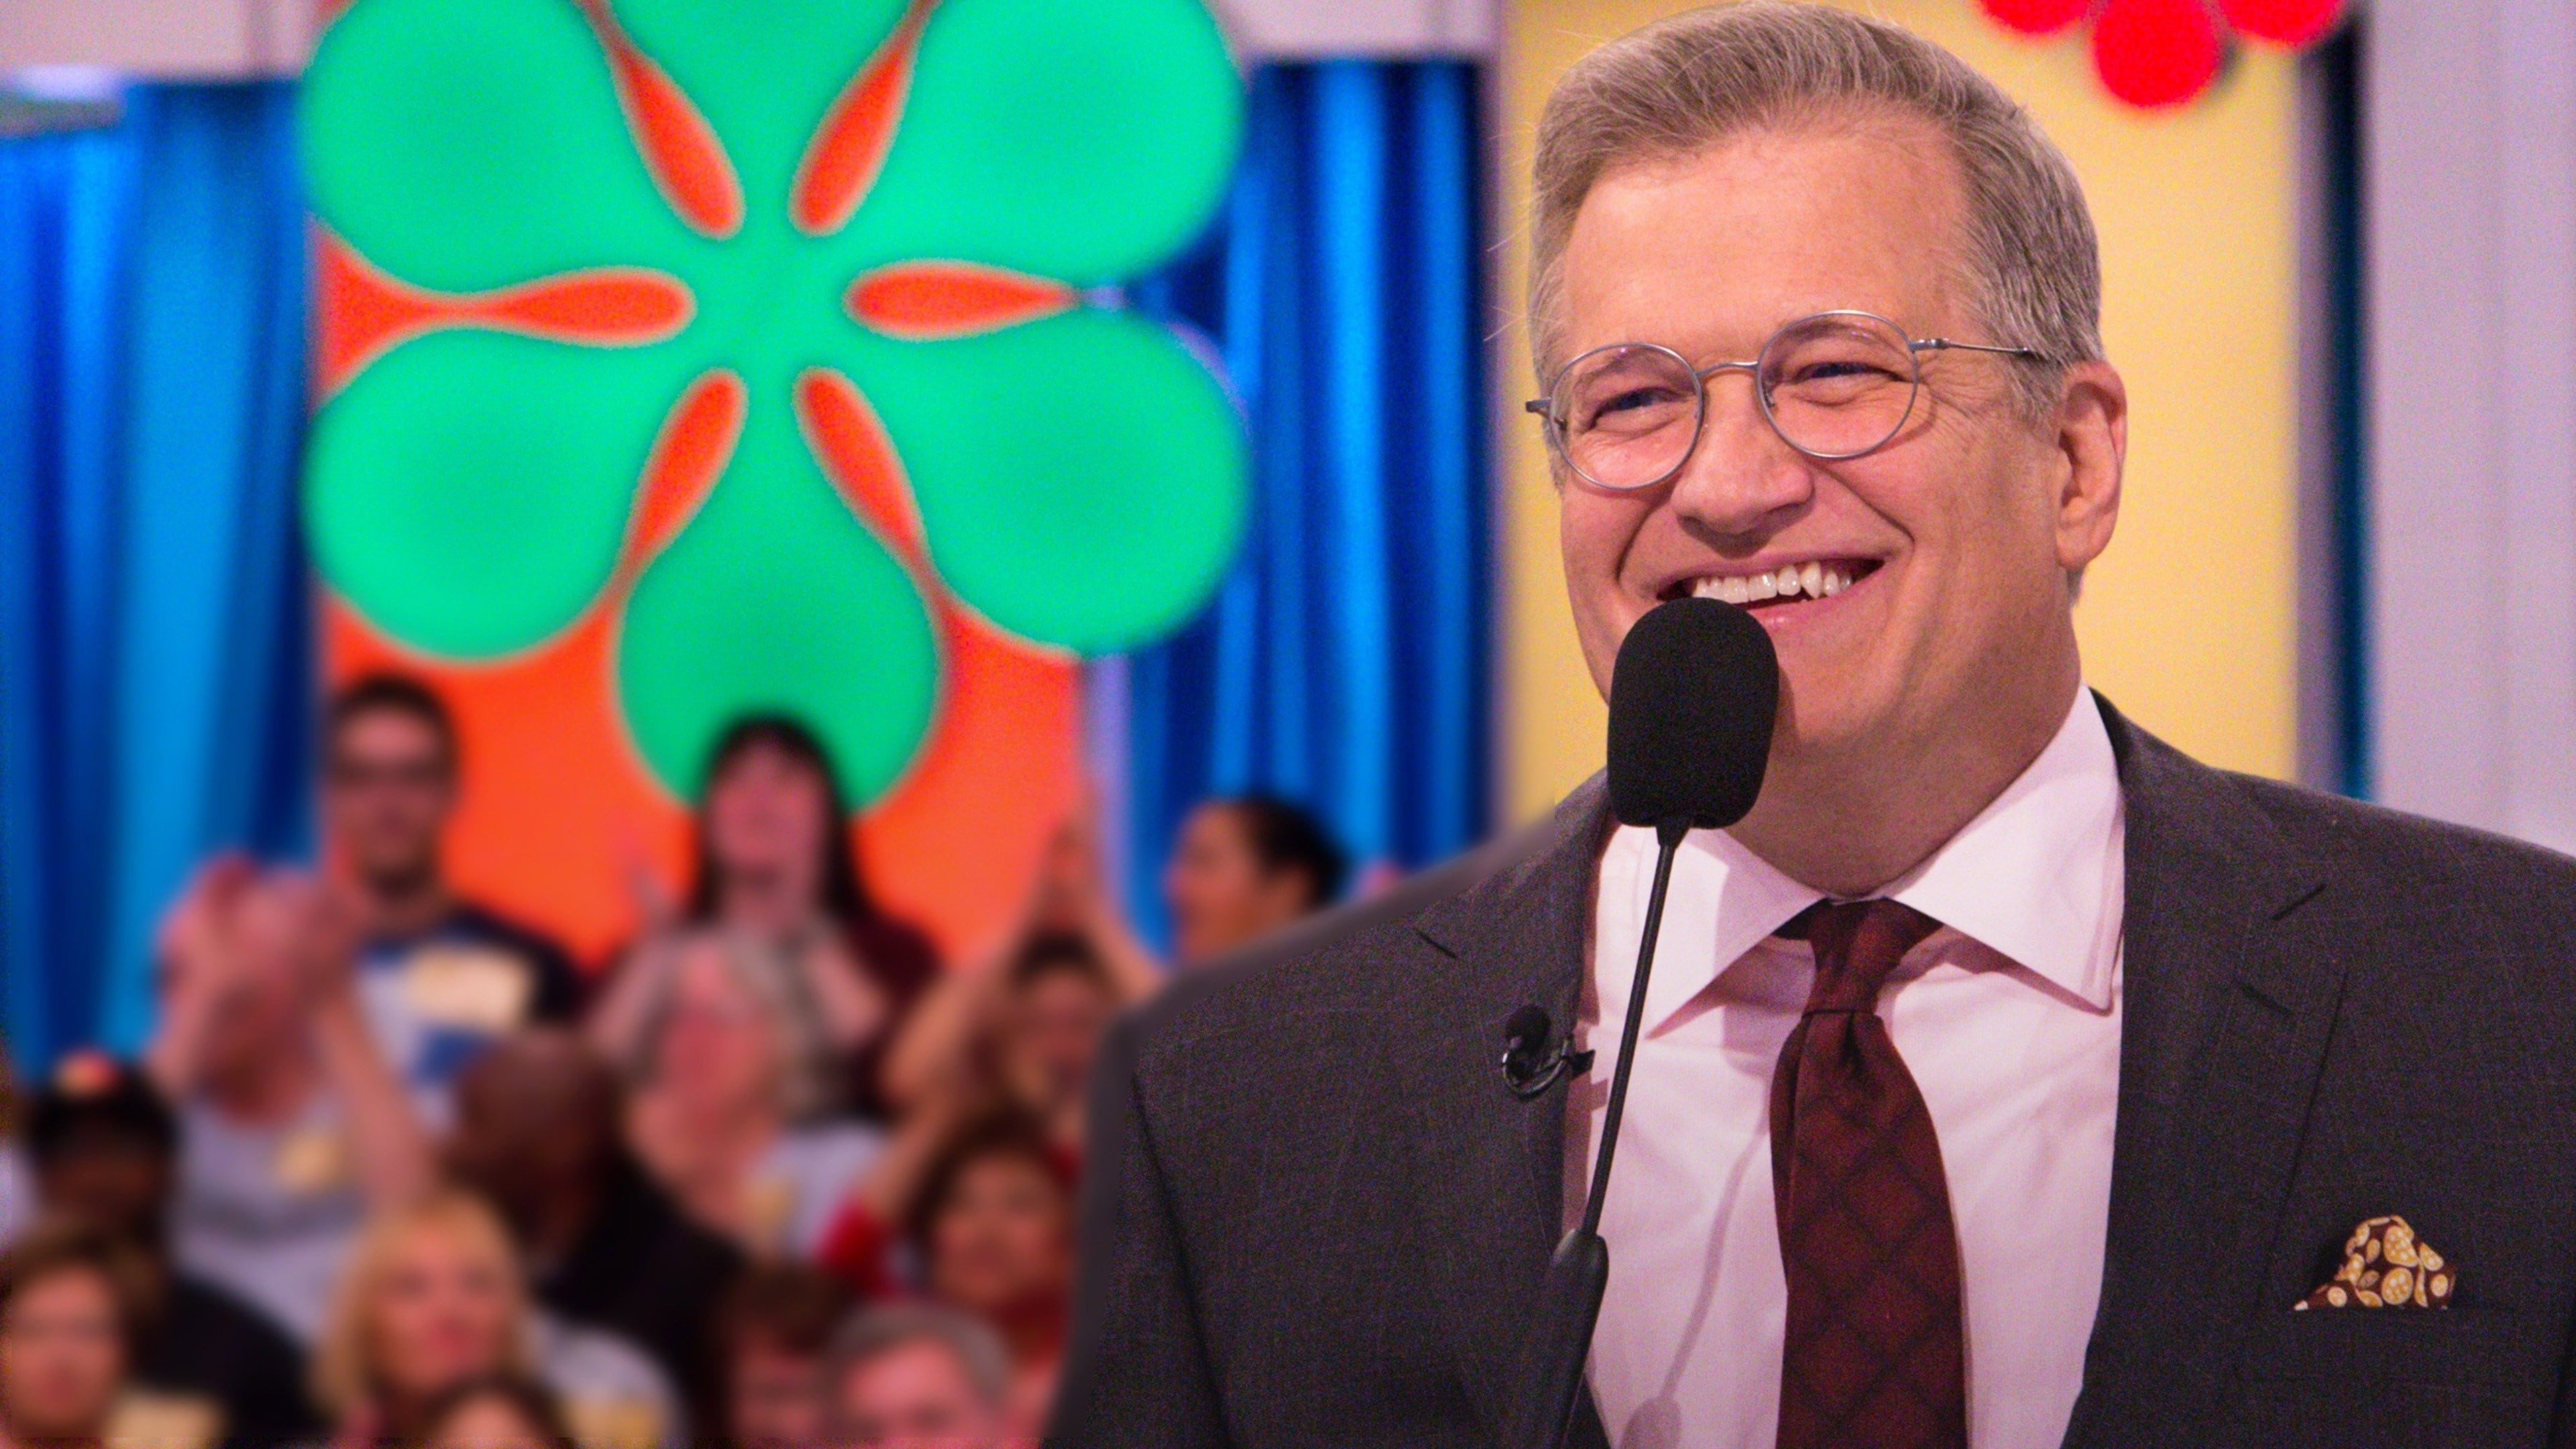 The Price Is Right - Season 1 Episode 4 : The Price Is Right Season 1 Episode 4